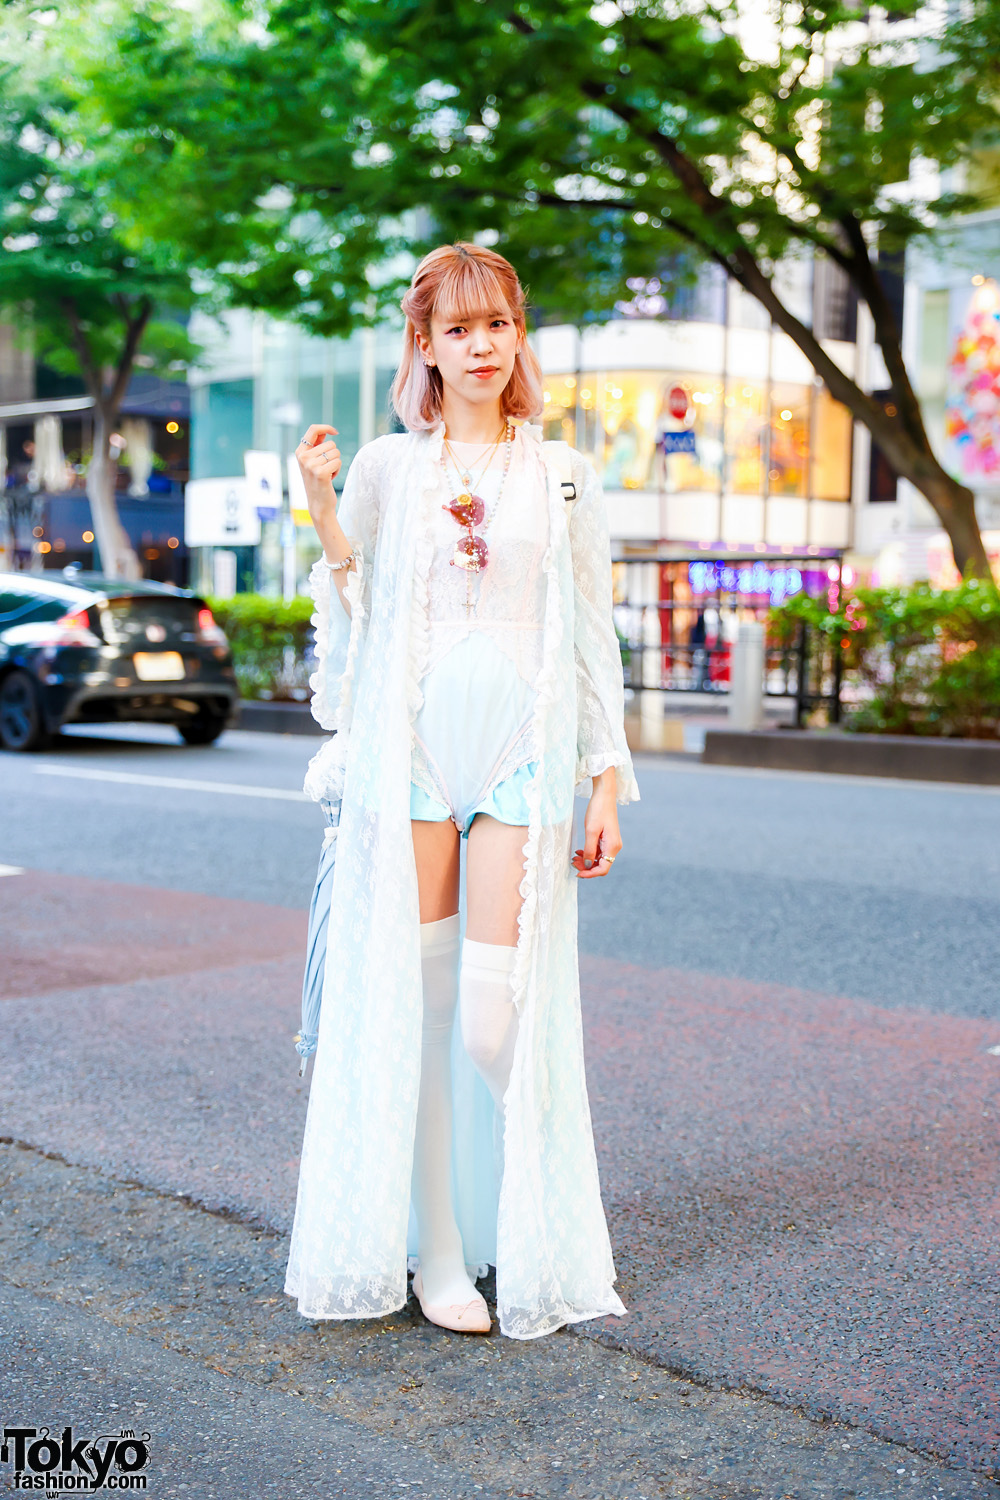 Fashion Designer in White Lace Romper, Thigh-High White Stockings, H&M Ballerina Flats, Resale Polka Dot Sling Bag, Rose Tint Sunglasses, Medallion Necklaces, Rosary Necklace & Stone-Embellished Rings